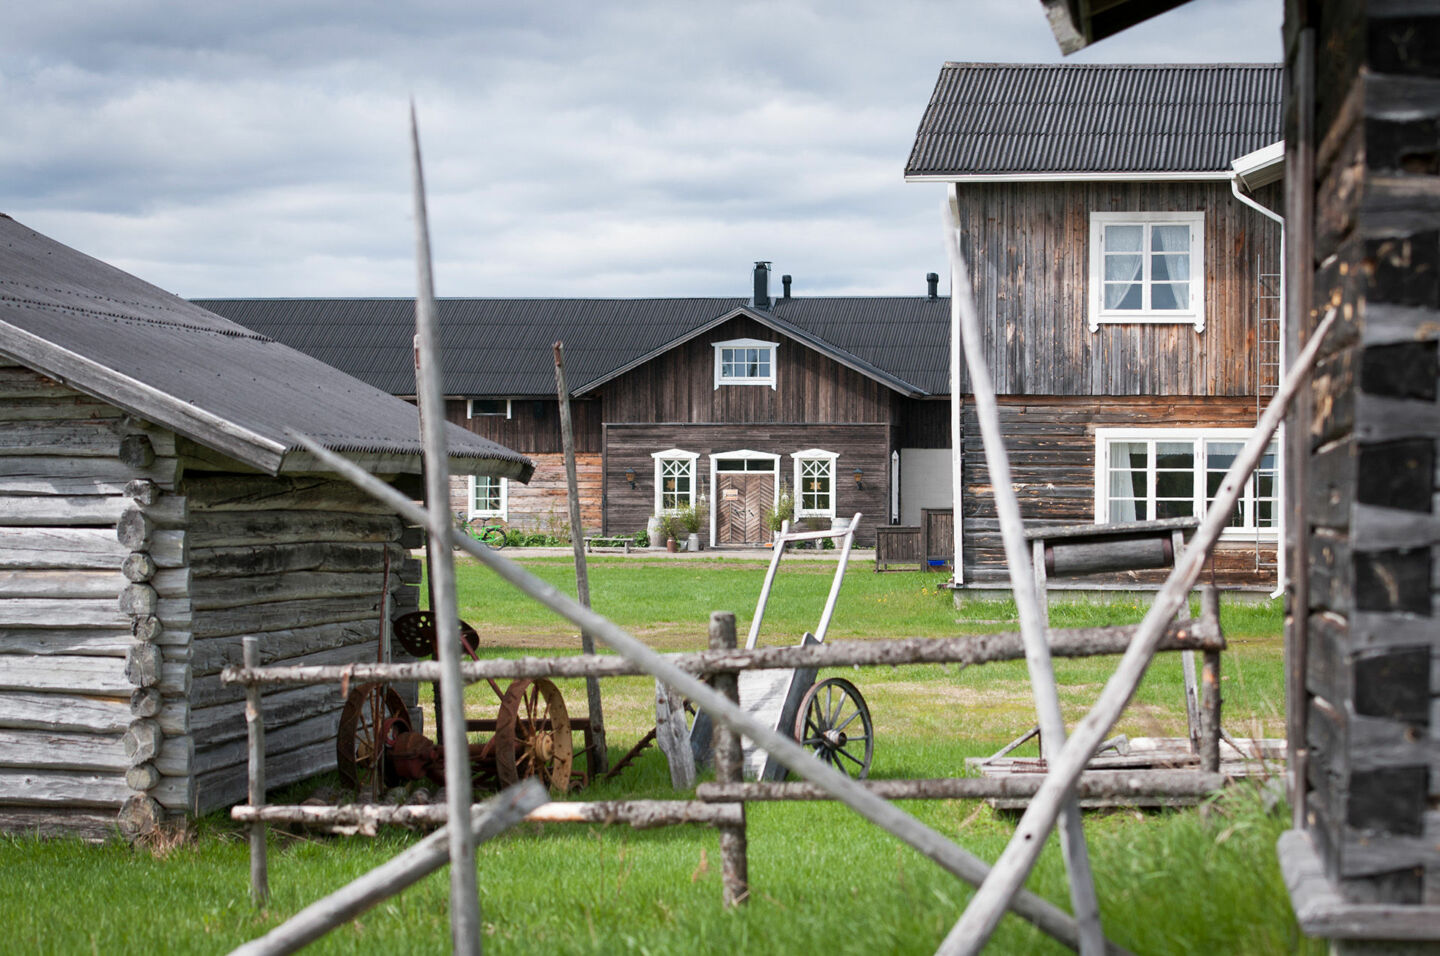 Historic buildings in the countryside in film location Kittilä, Finland